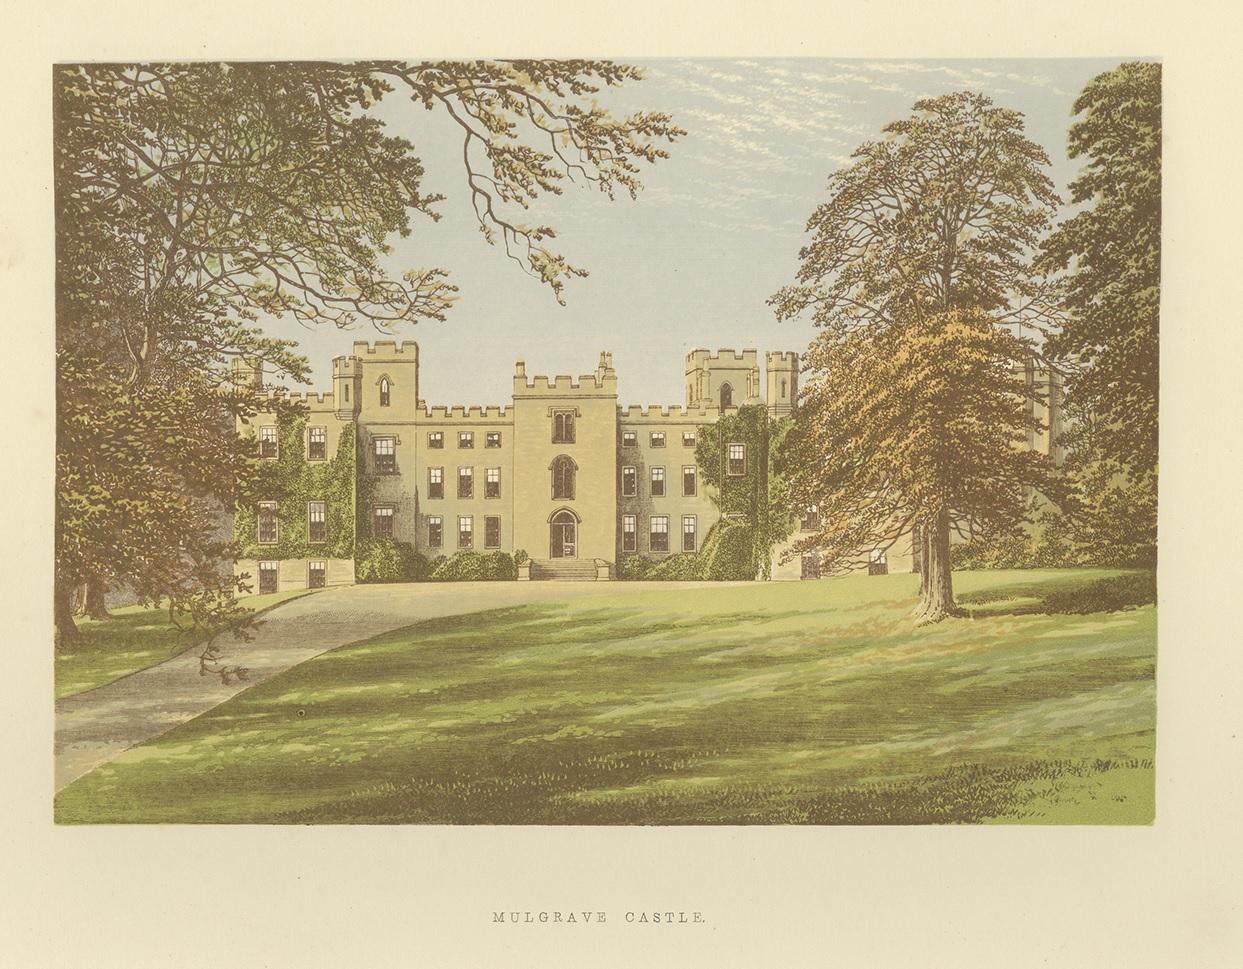 Antique print titled 'Mulgrave Castle'. Color printed woodblock of Mulgrave Castle, in Lythe, near Whitby, Yorkshire, England. This print originates from 'Picturesque Views of Seats of Noblemen and Gentlemen of Great Britain and Ireland' by the Rev.